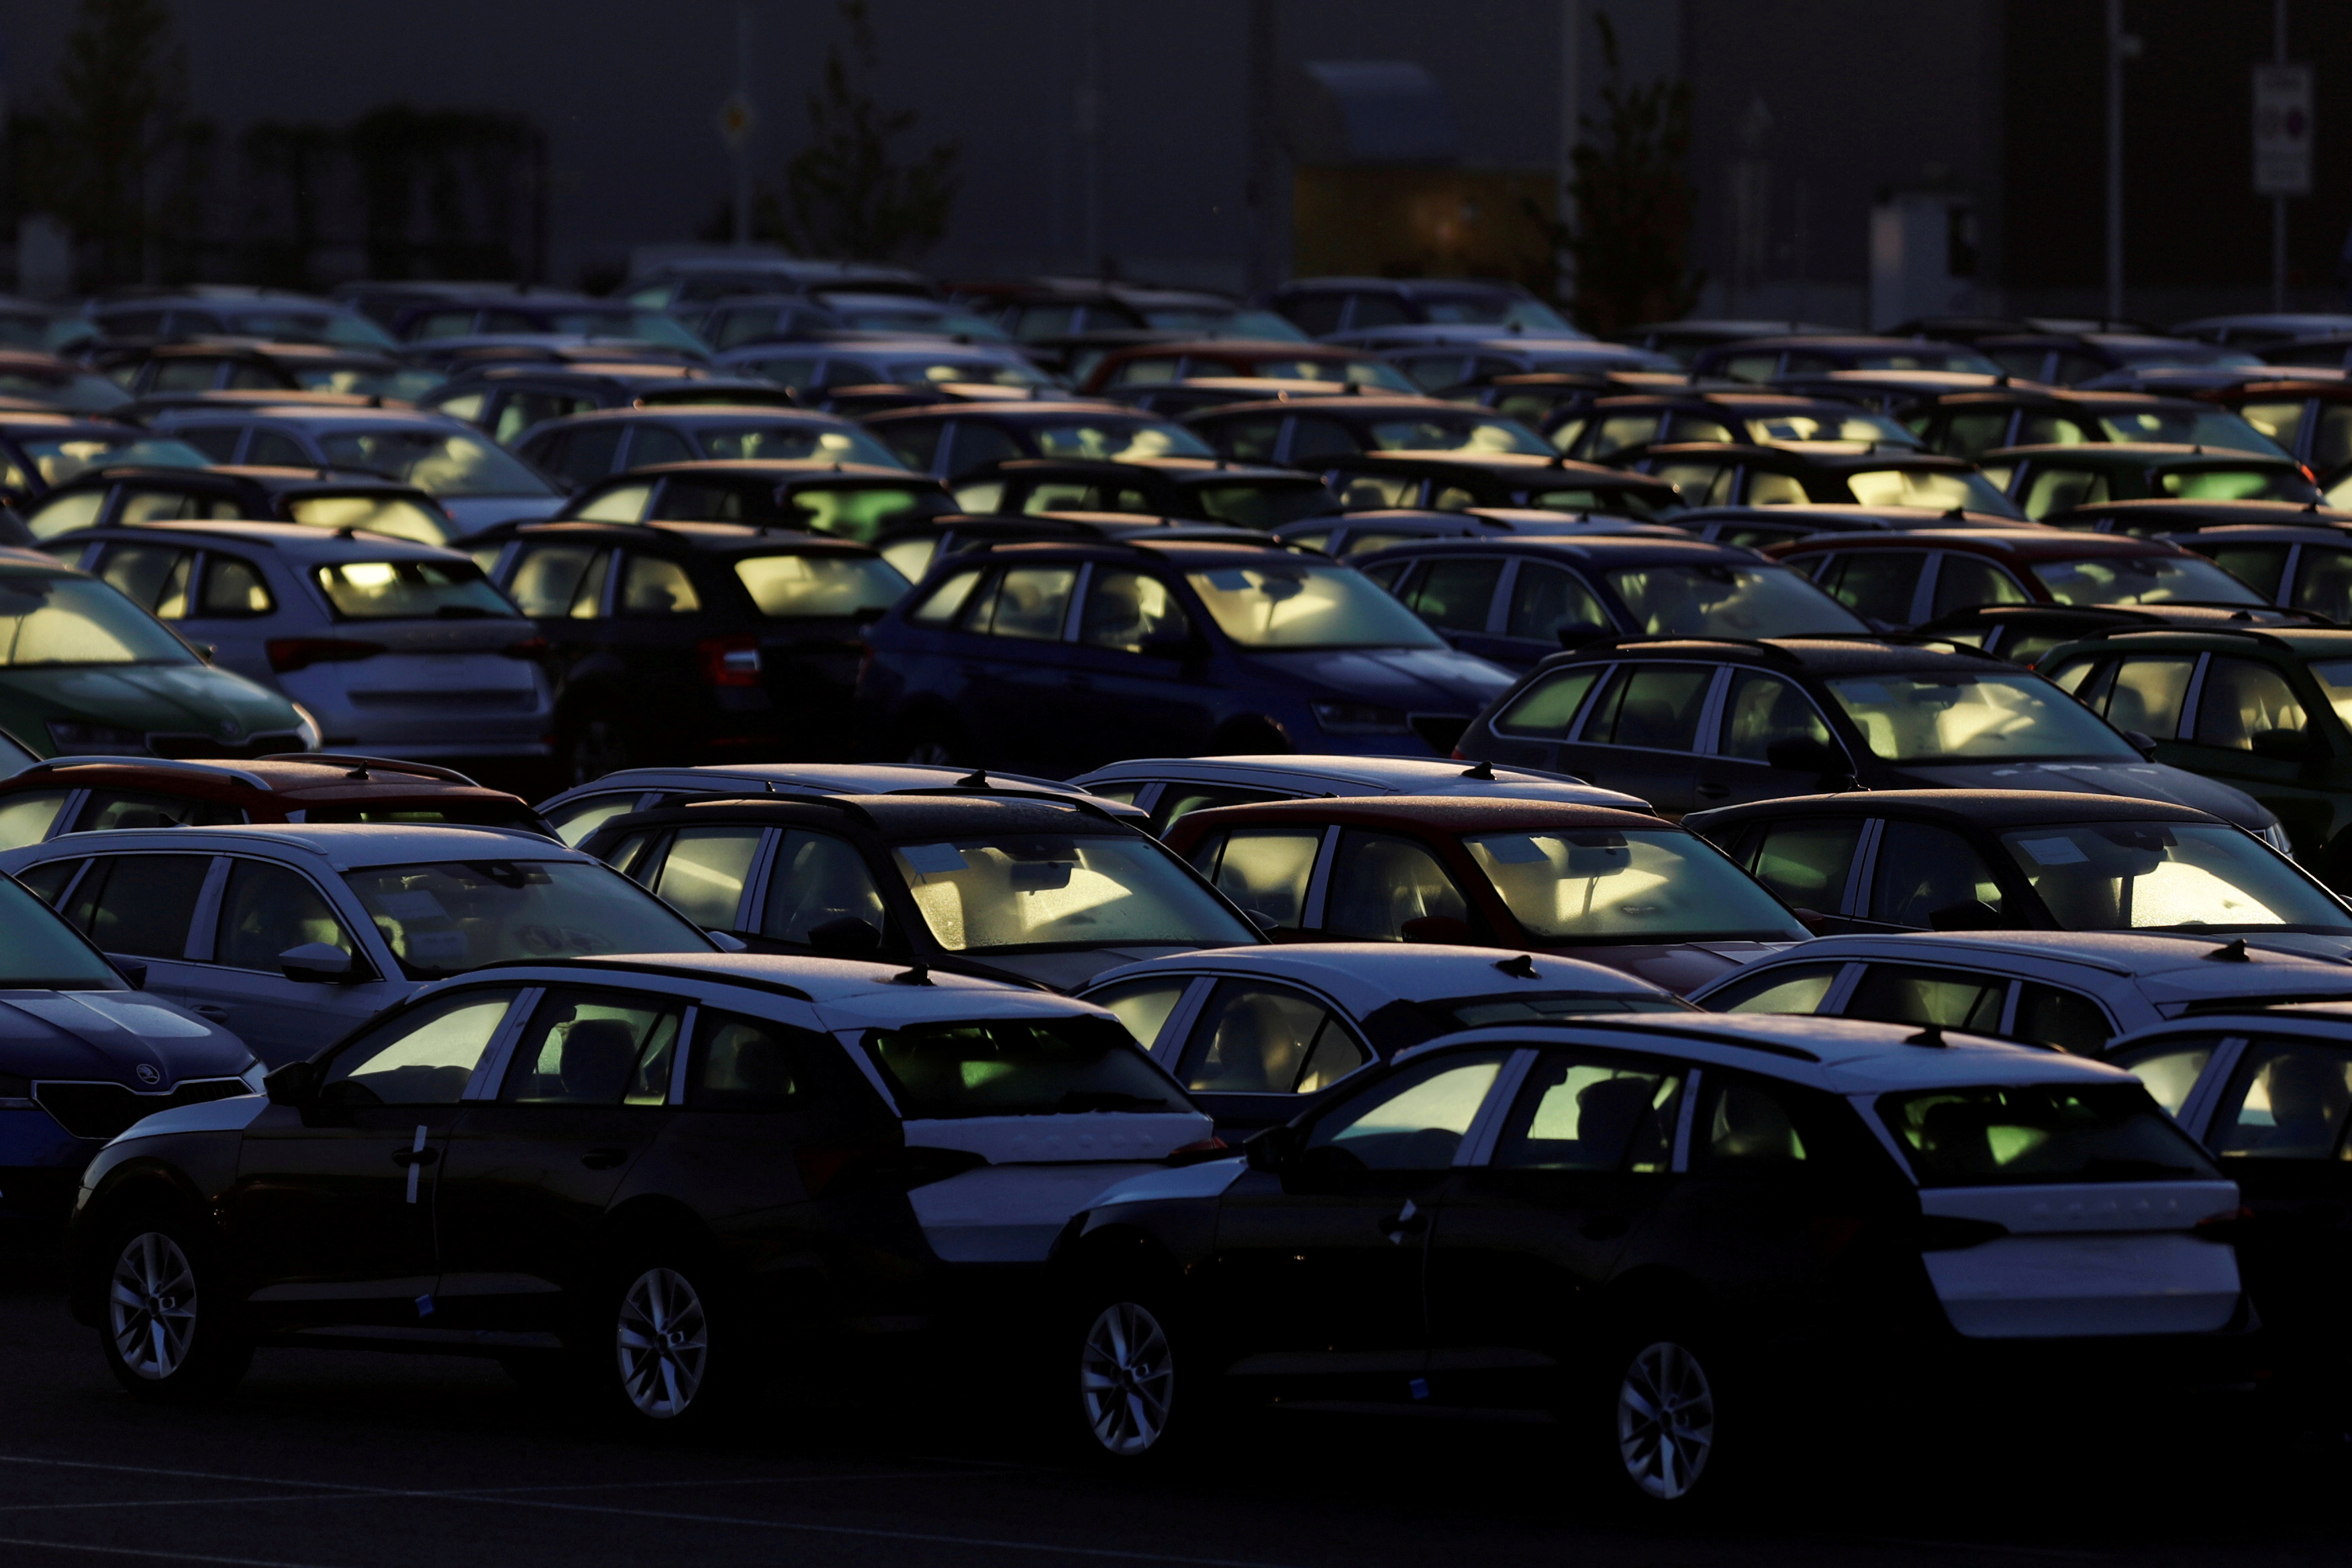 Cars are parked in the courtyard of Skoda Auto's factory in Mlada Boleslav